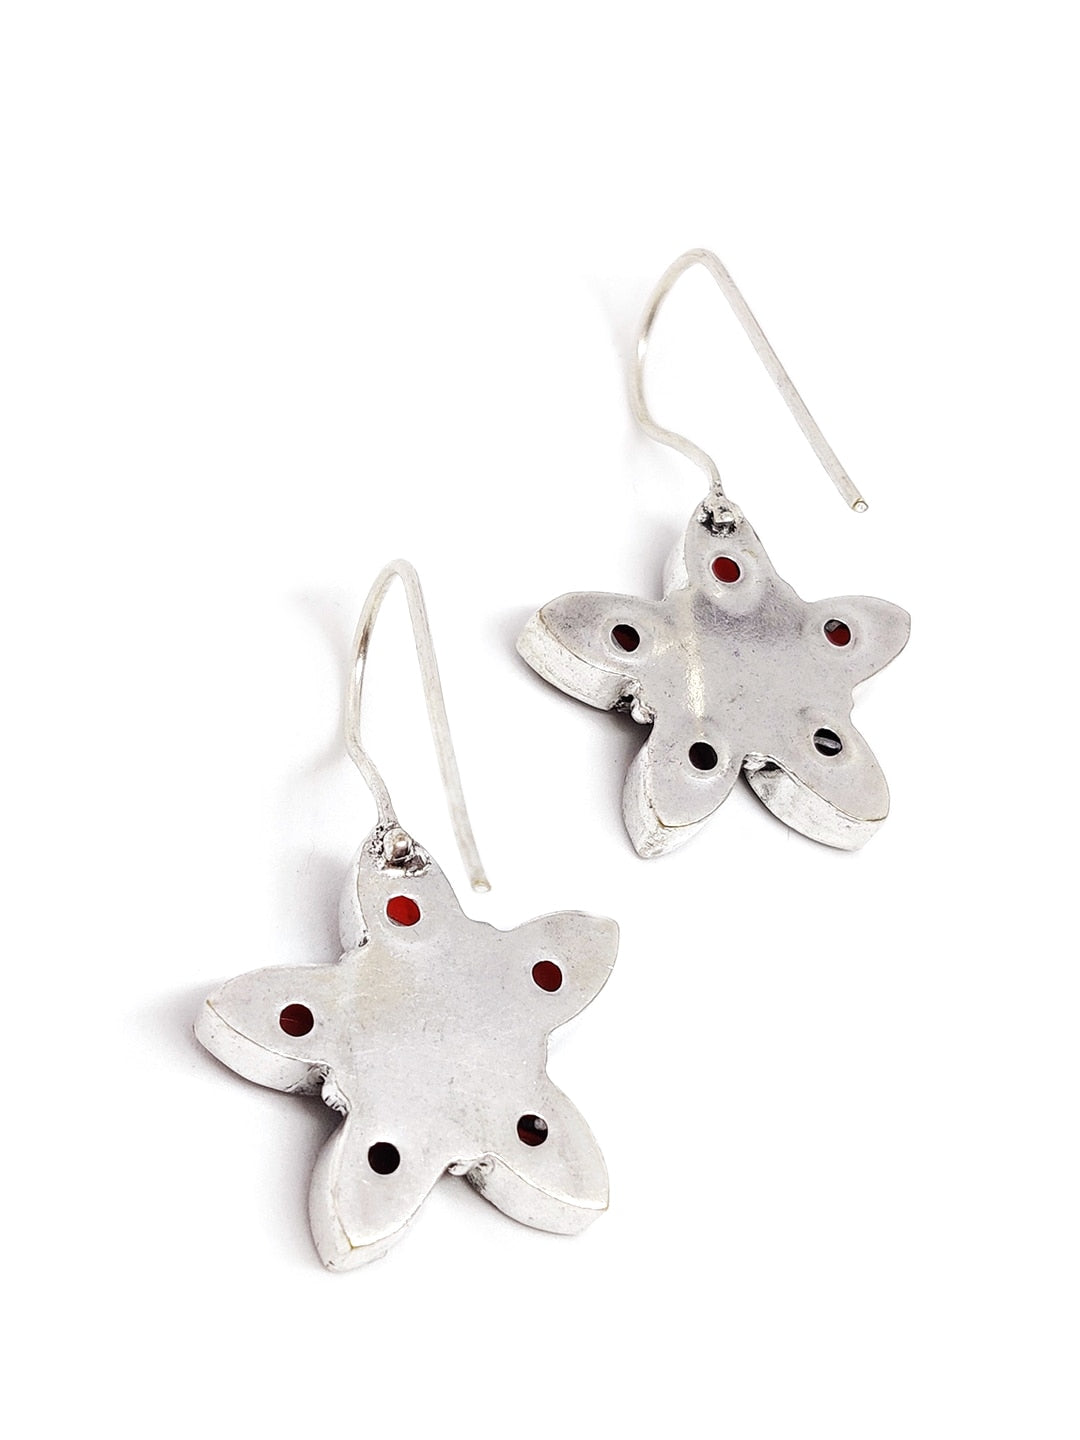 EL REGALO Red Floral German Silver Drop Earrings - for Women and Girls
Style ID: 16770276